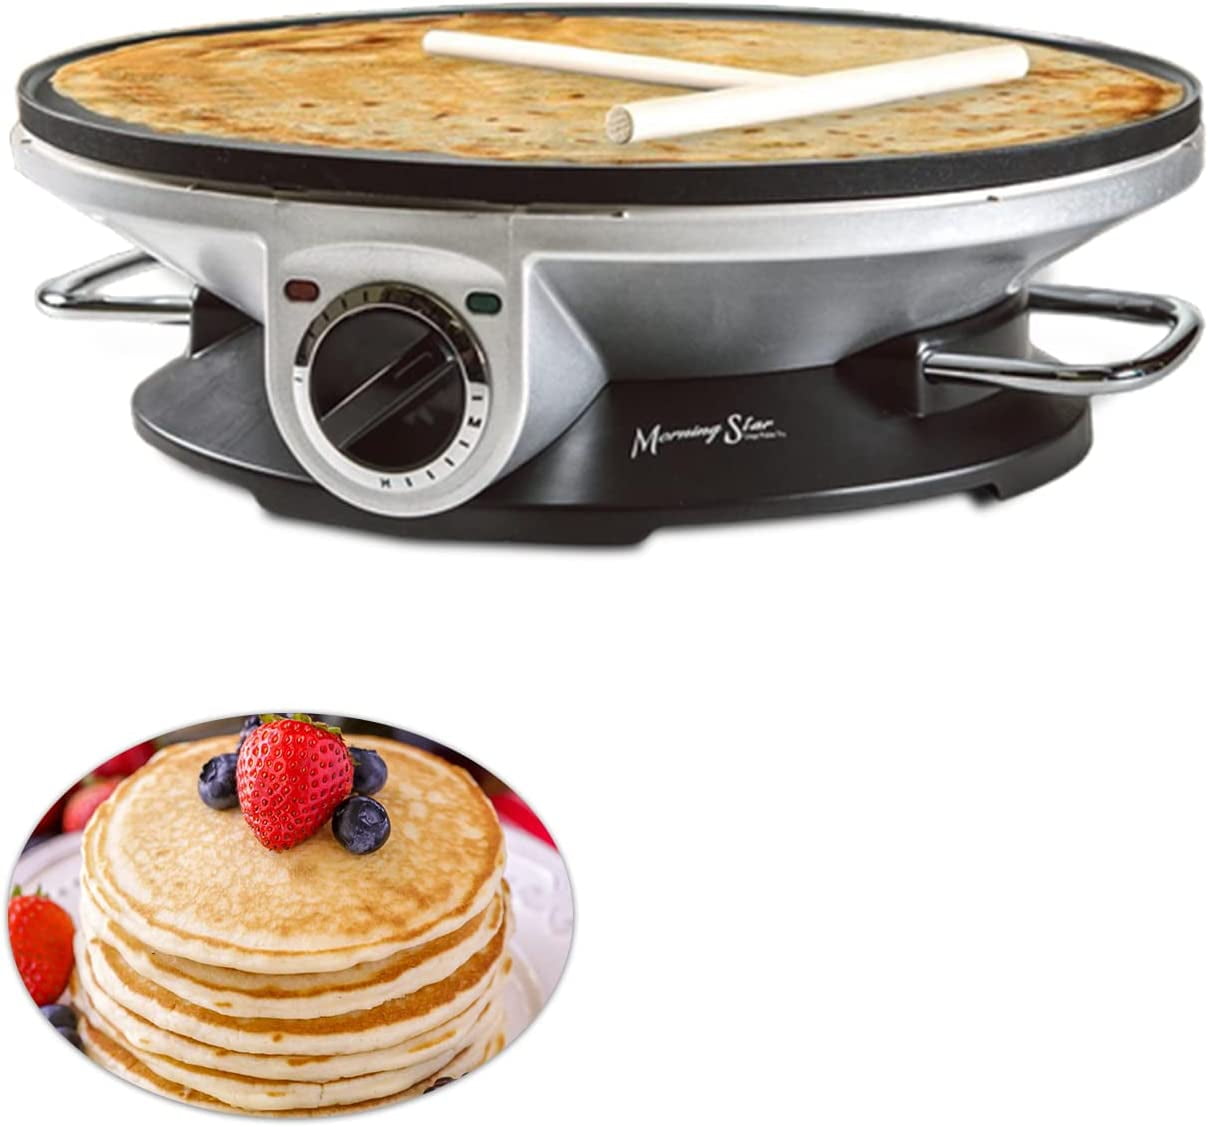 Morning Star Electric Crepe Maker with Large 13